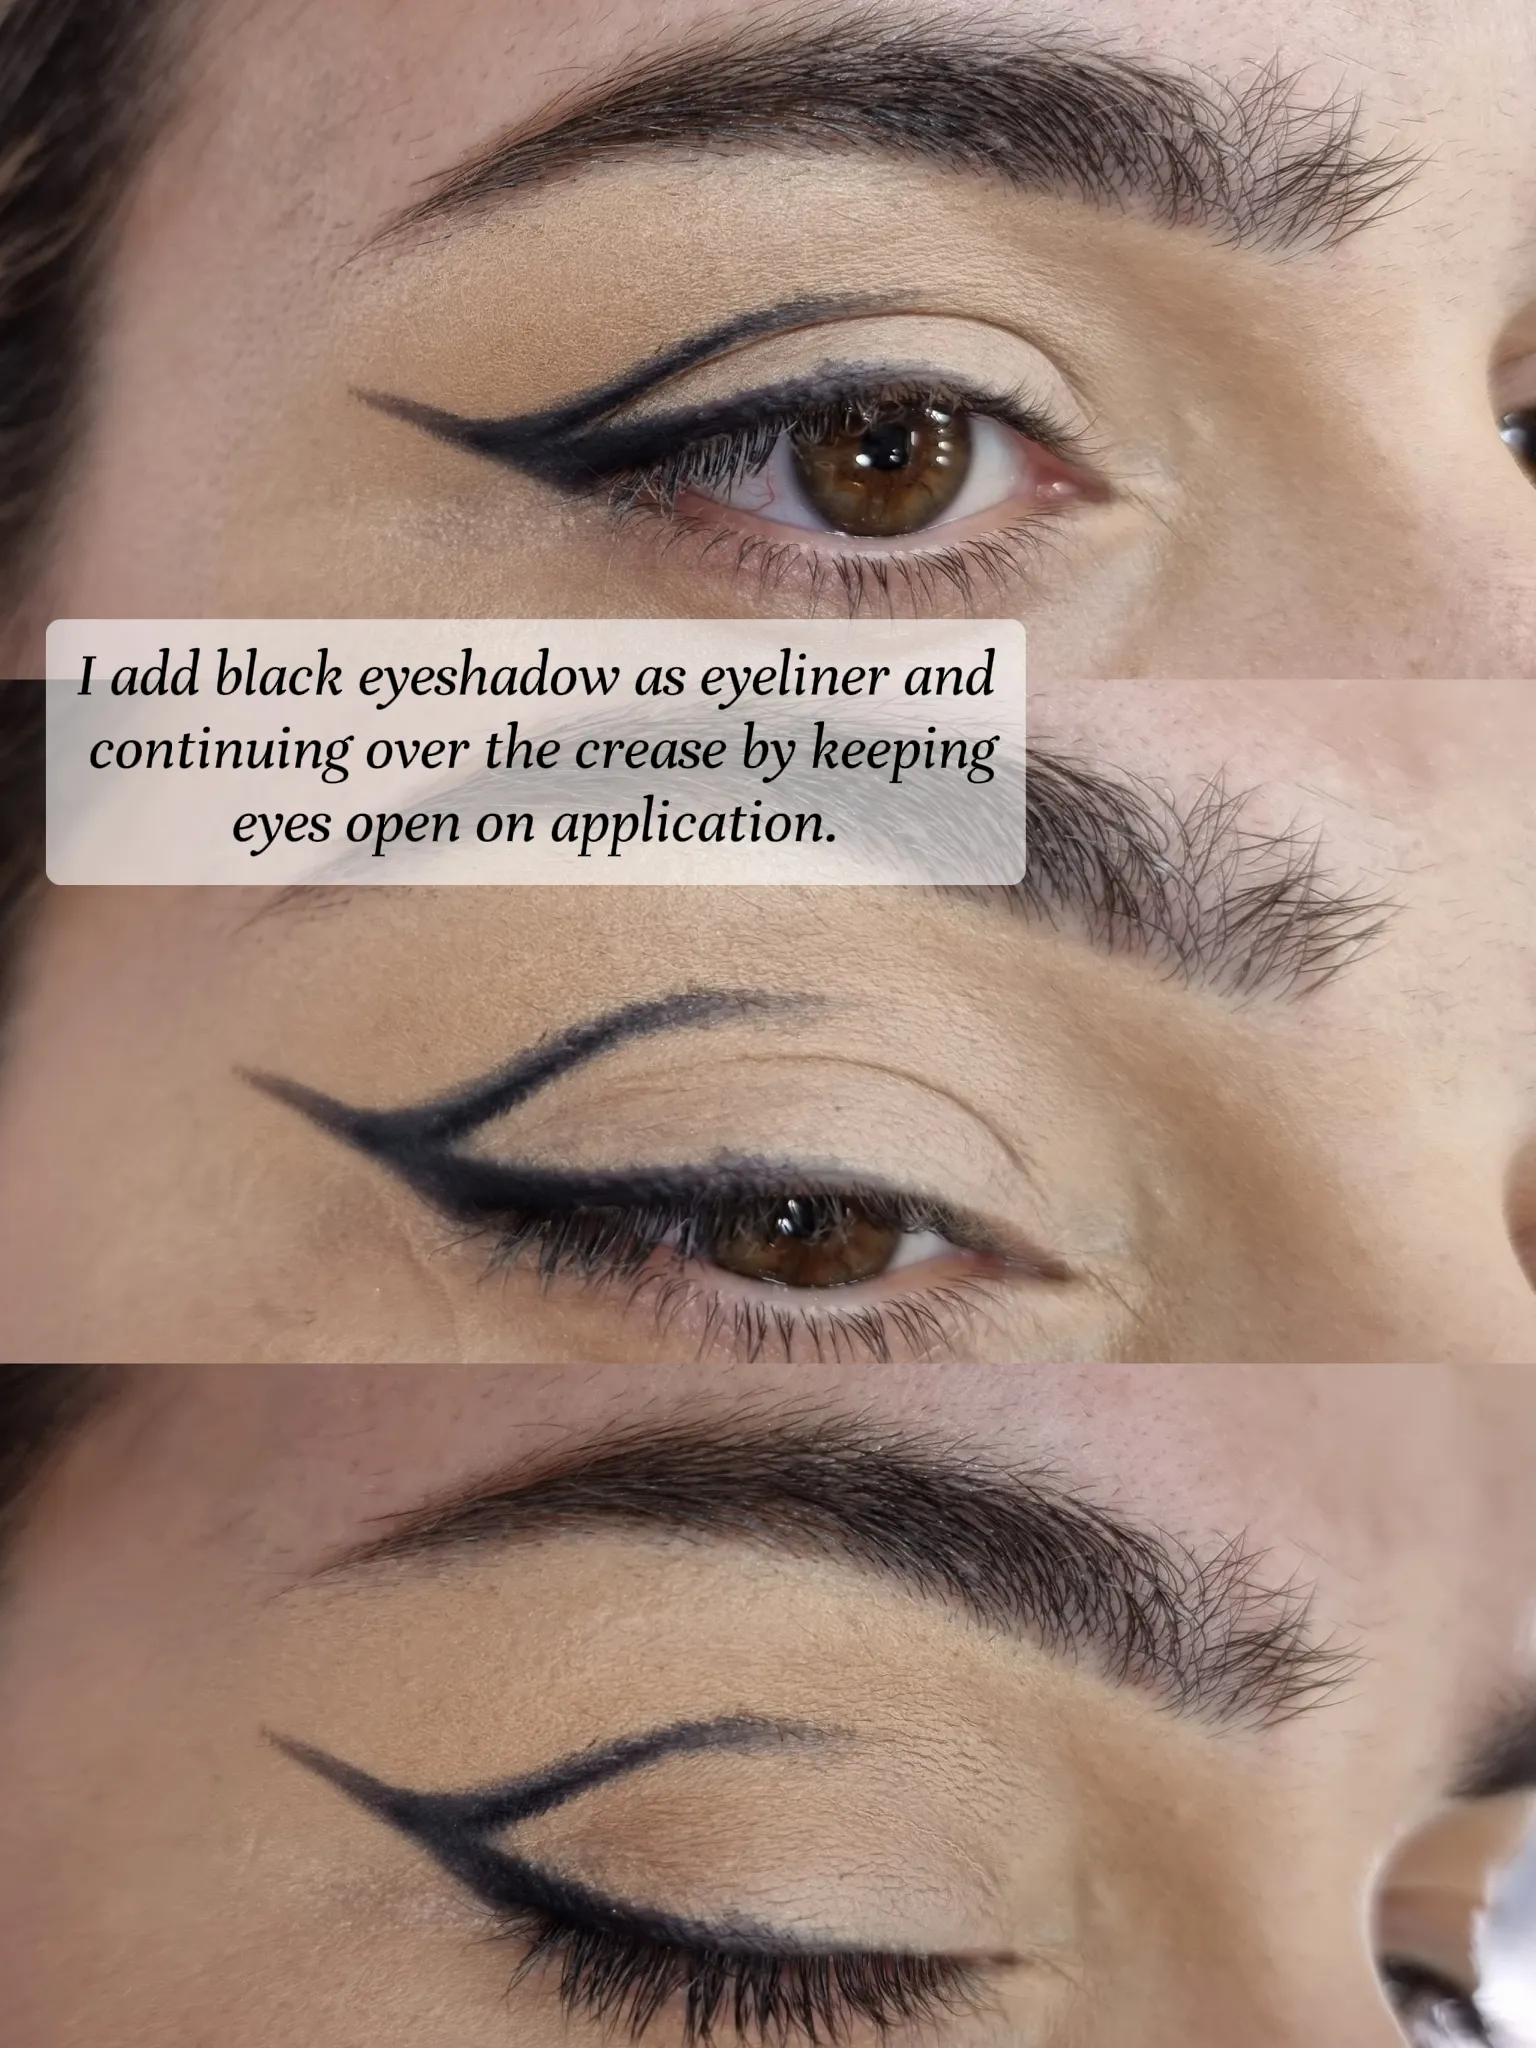 Easy graphic liner for hooded eyes 🖤💕 #easygraphicliner